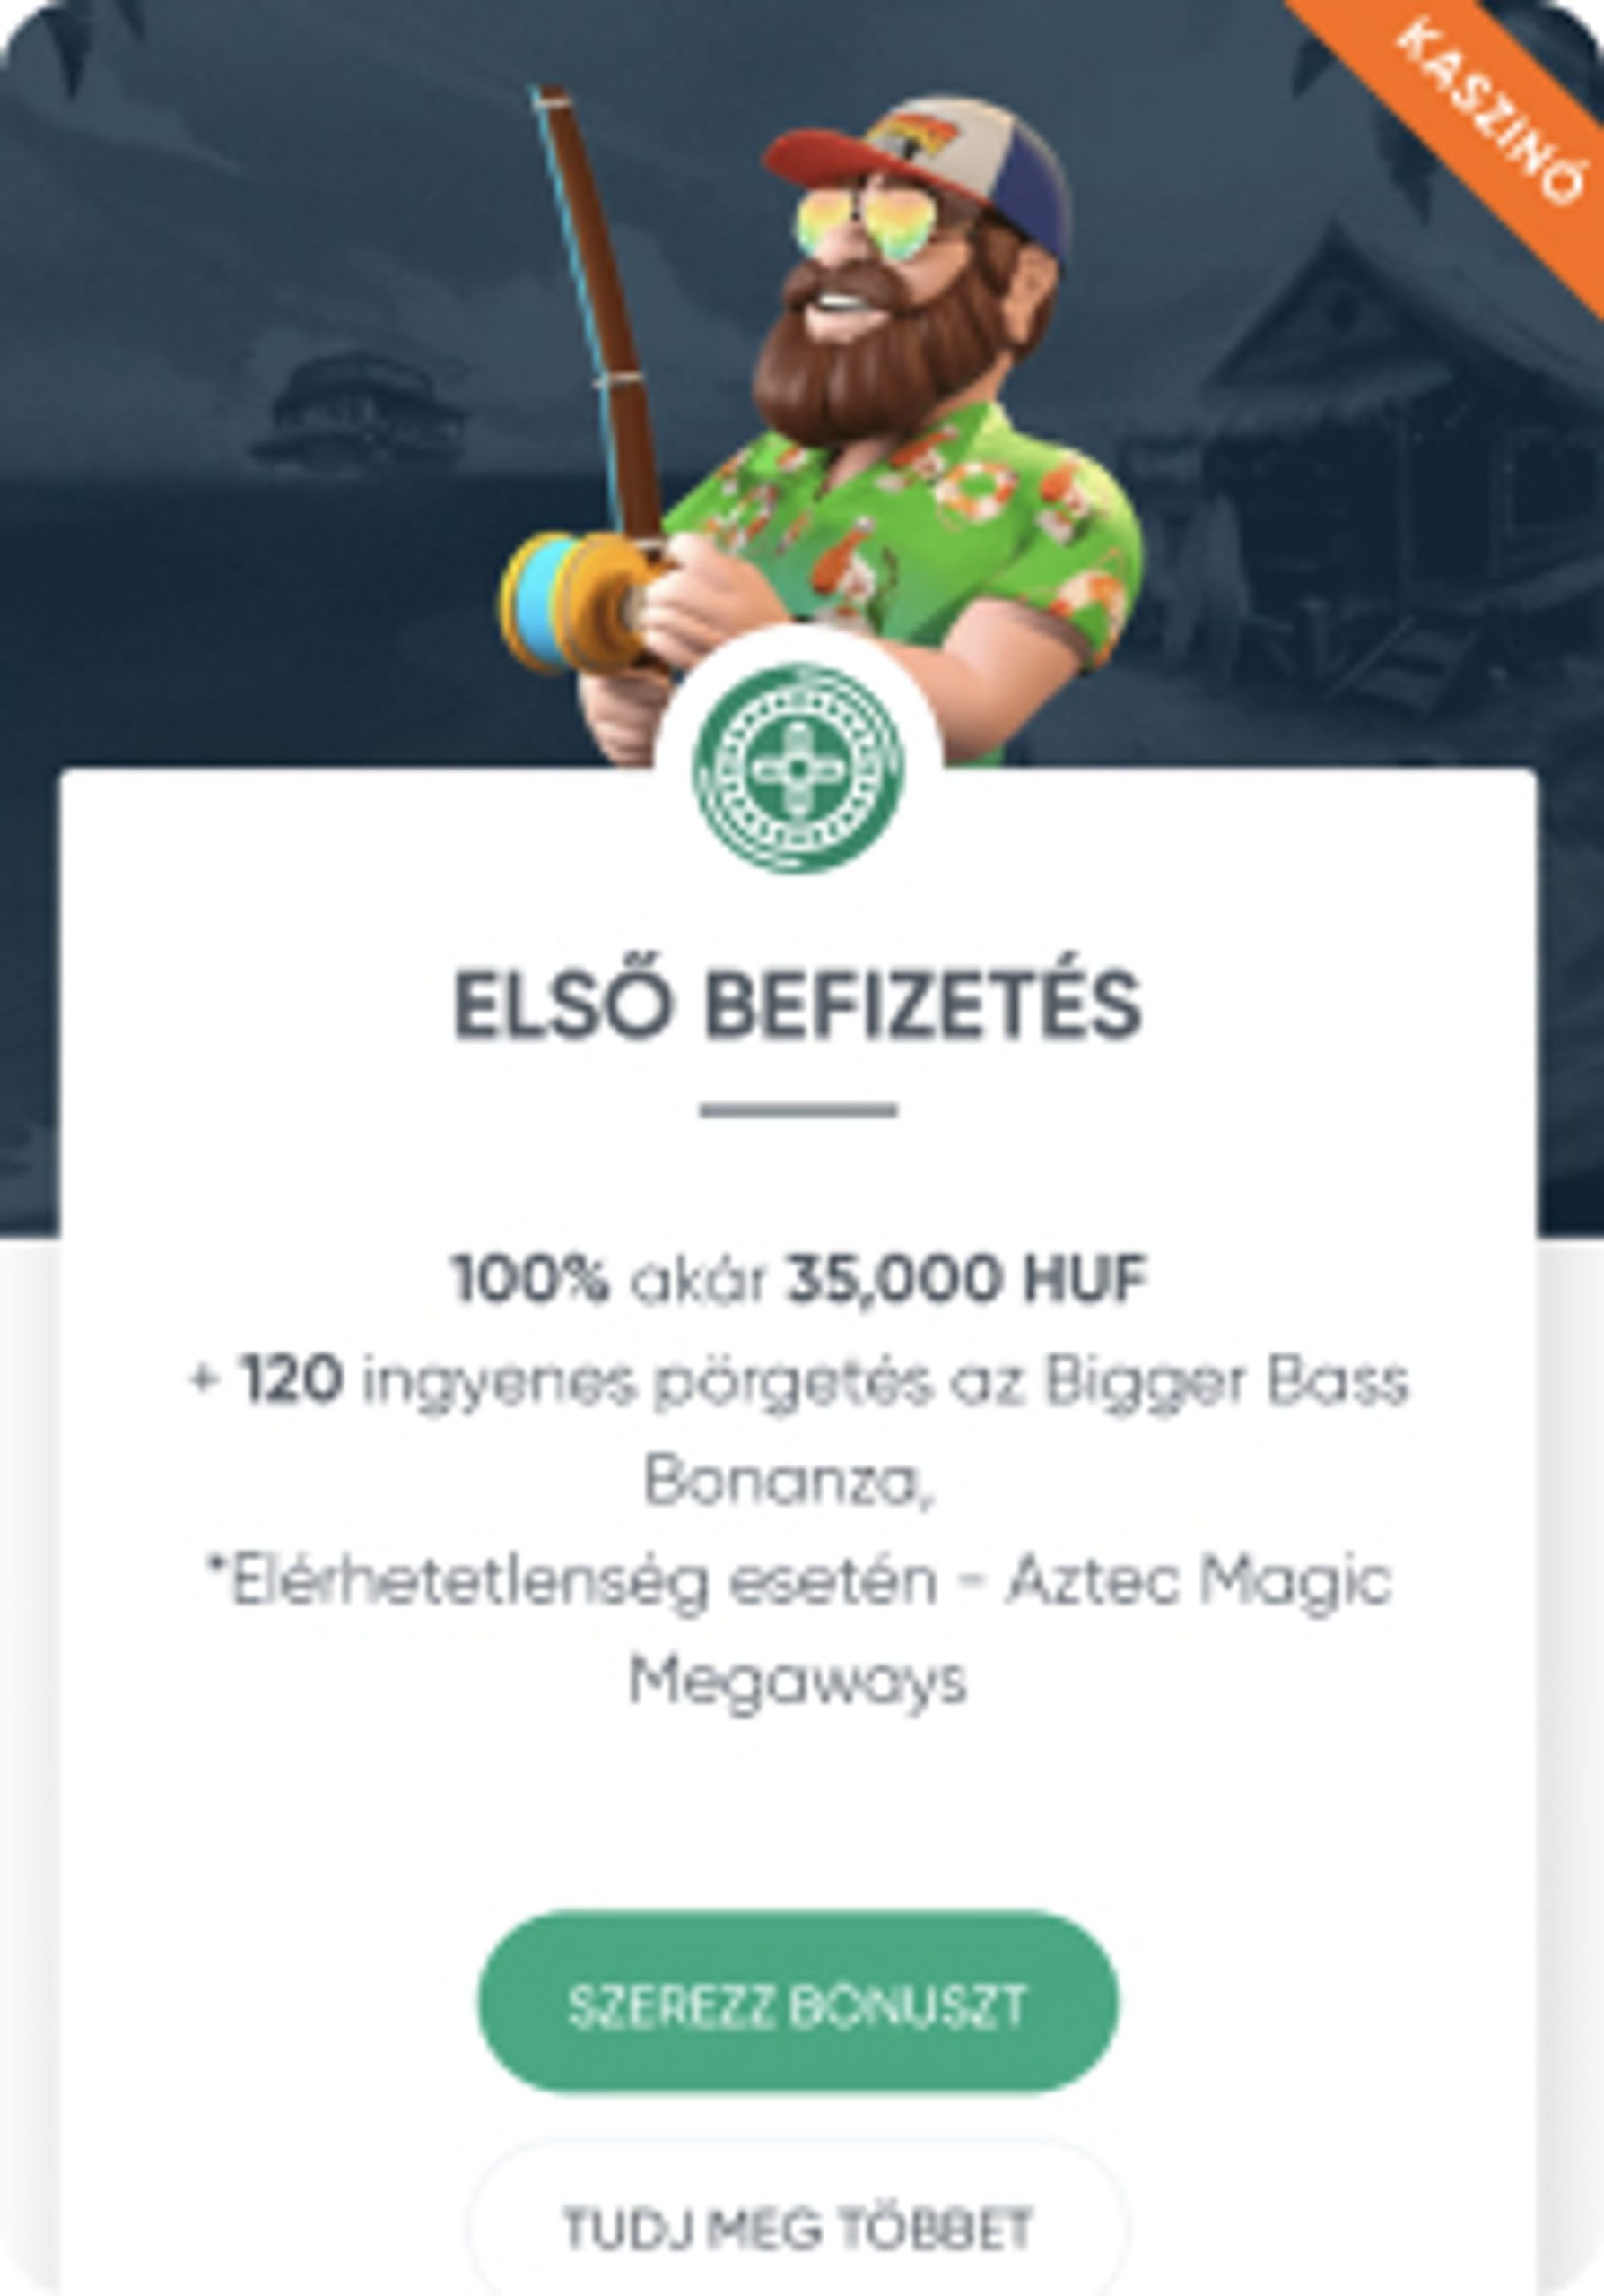 ivibet casino mobile screenshot - promotions page